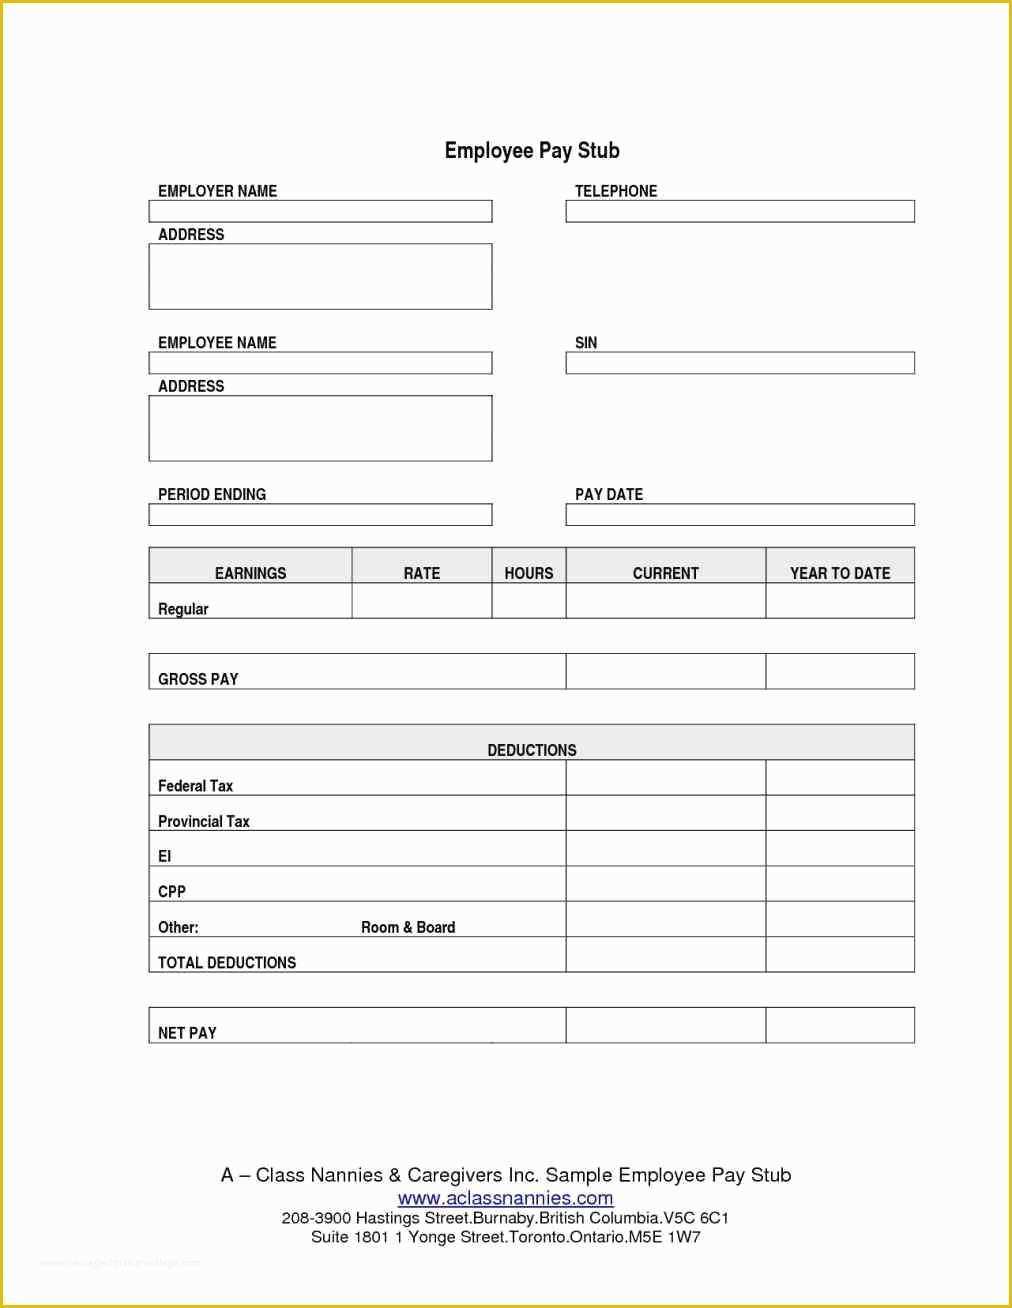 Free Check Stub Maker Template Of Check Stub Creator Resume format software 1099 Pay